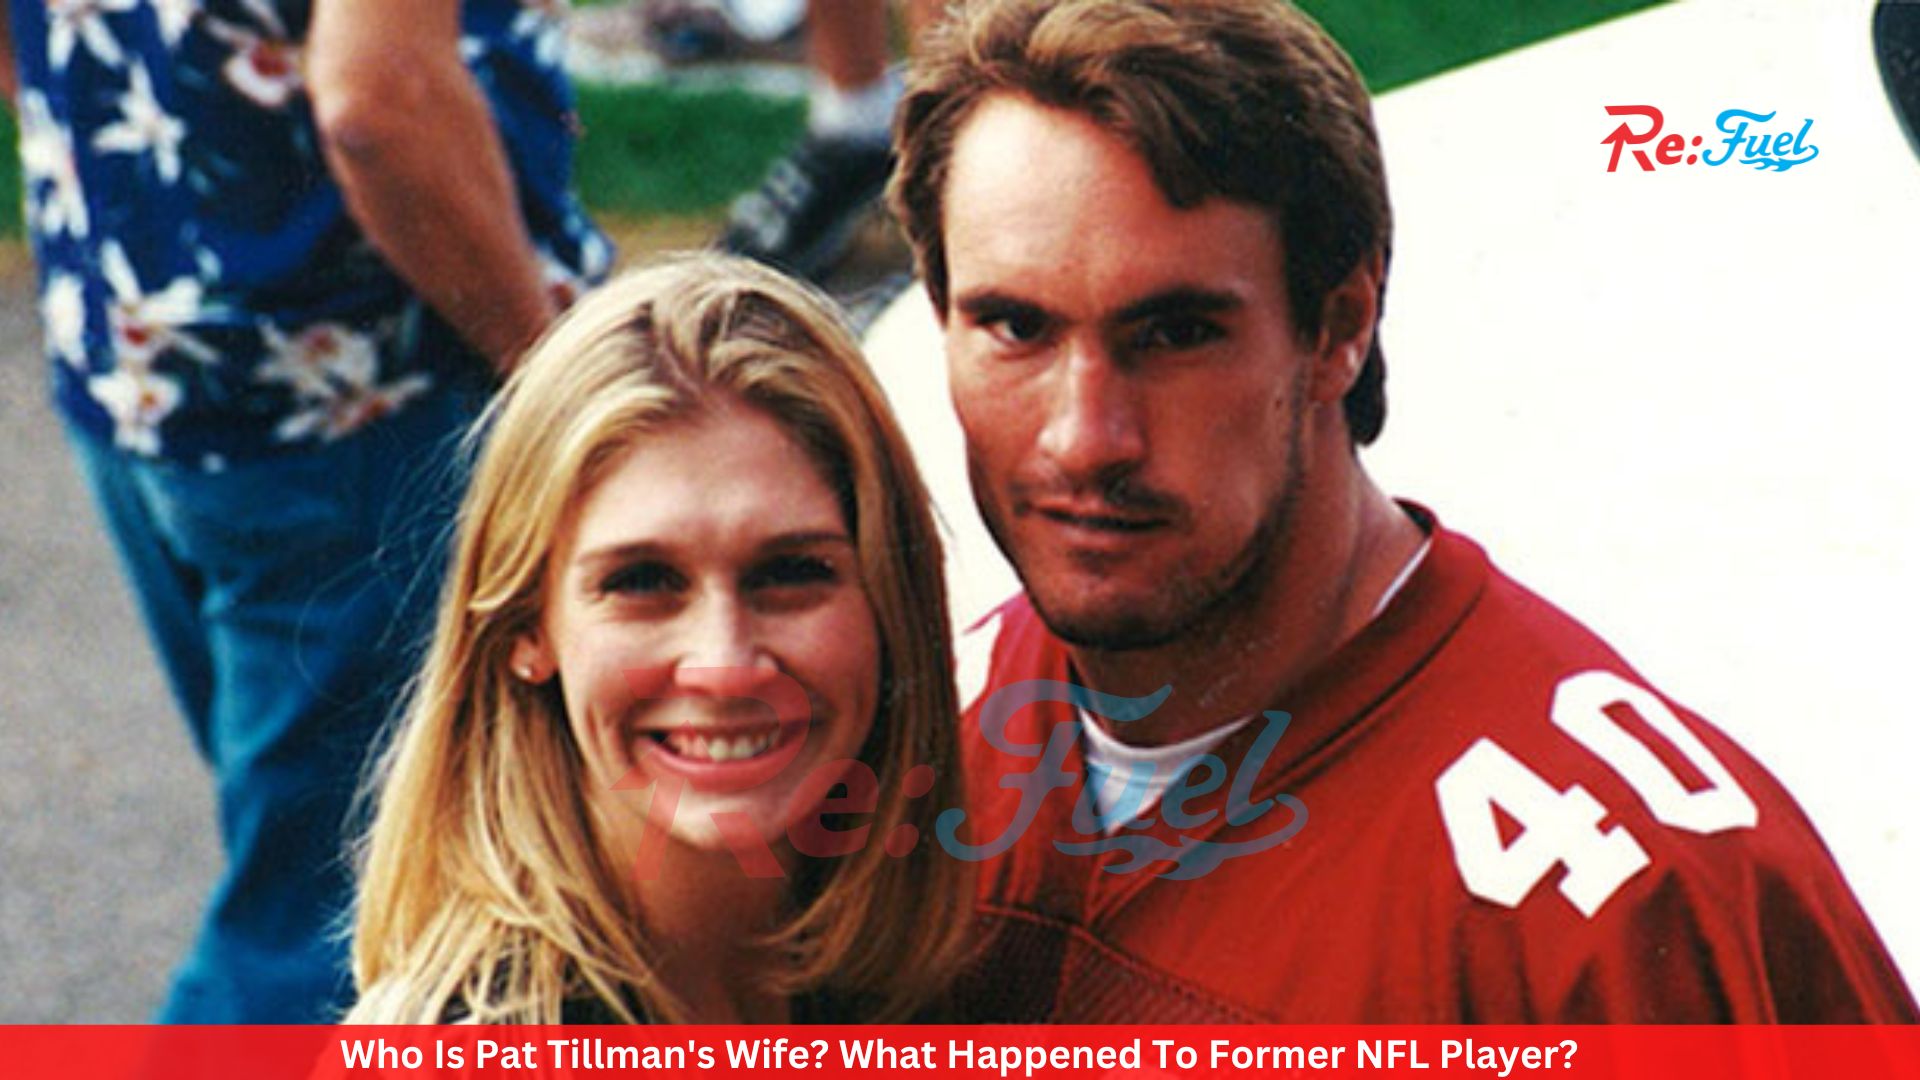 Who Is Pat Tillman's Wife? What Happened To Former NFL Player?